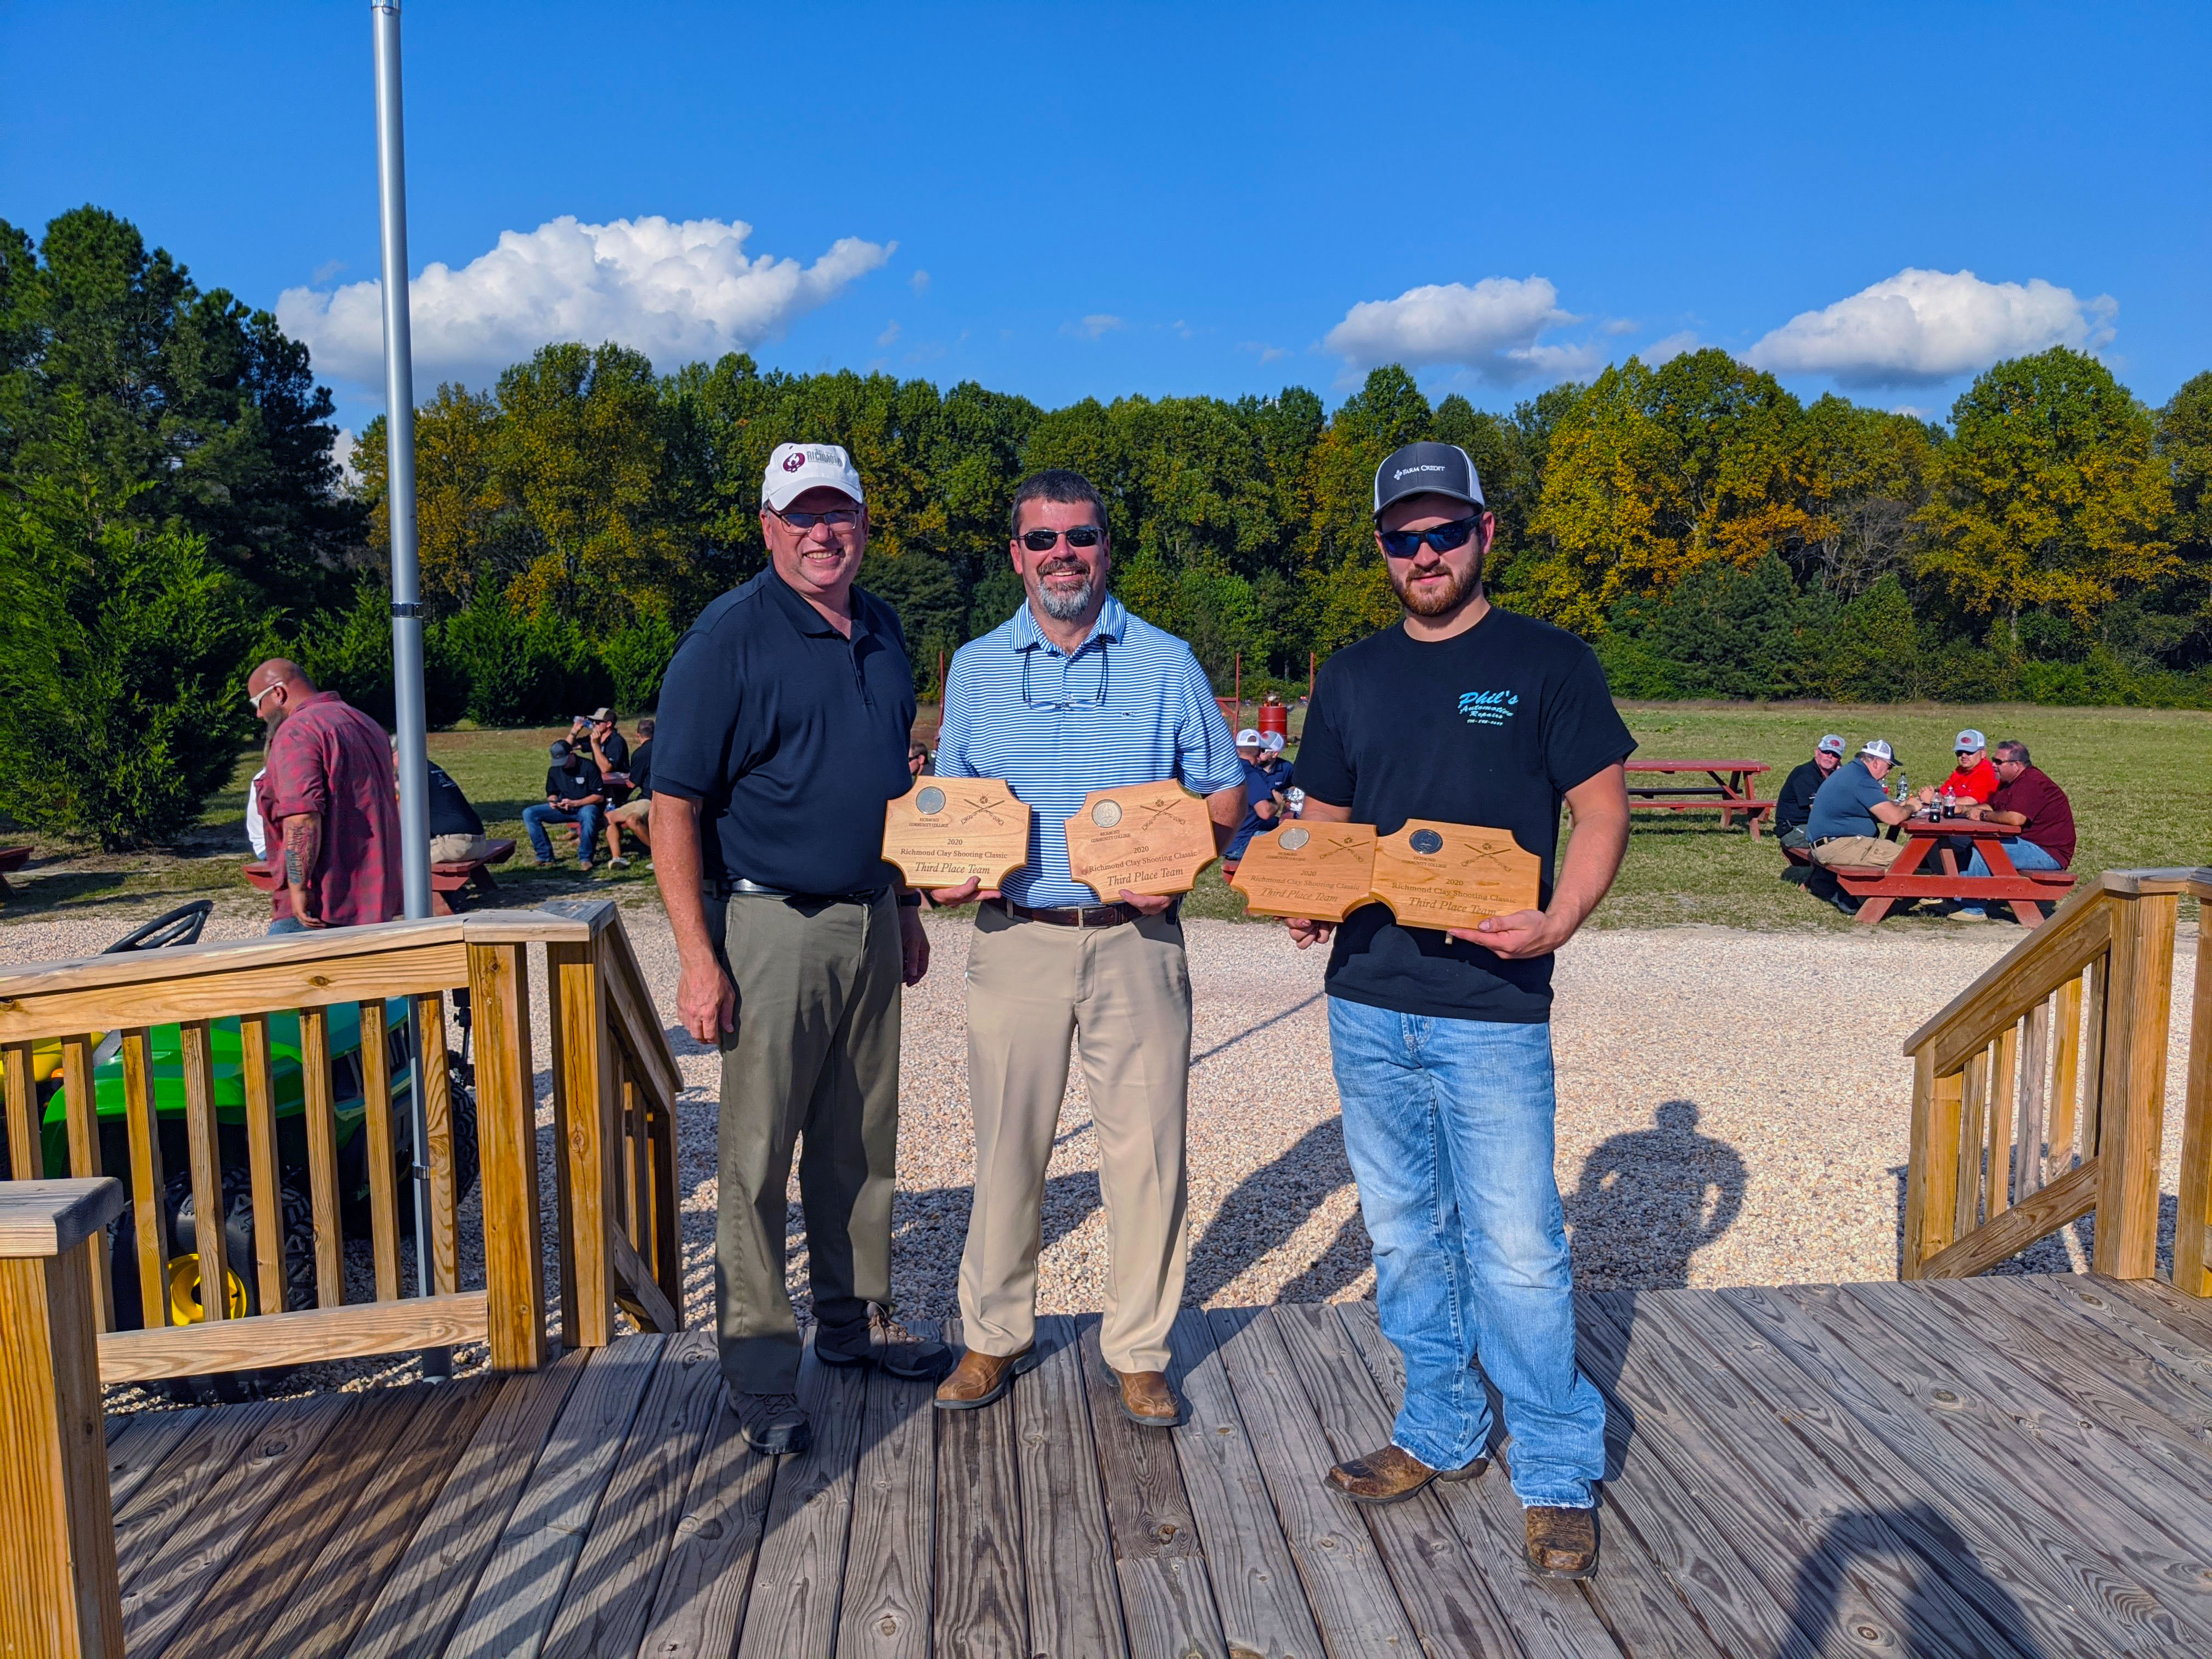 Clay shoot third place winners hold their trophies